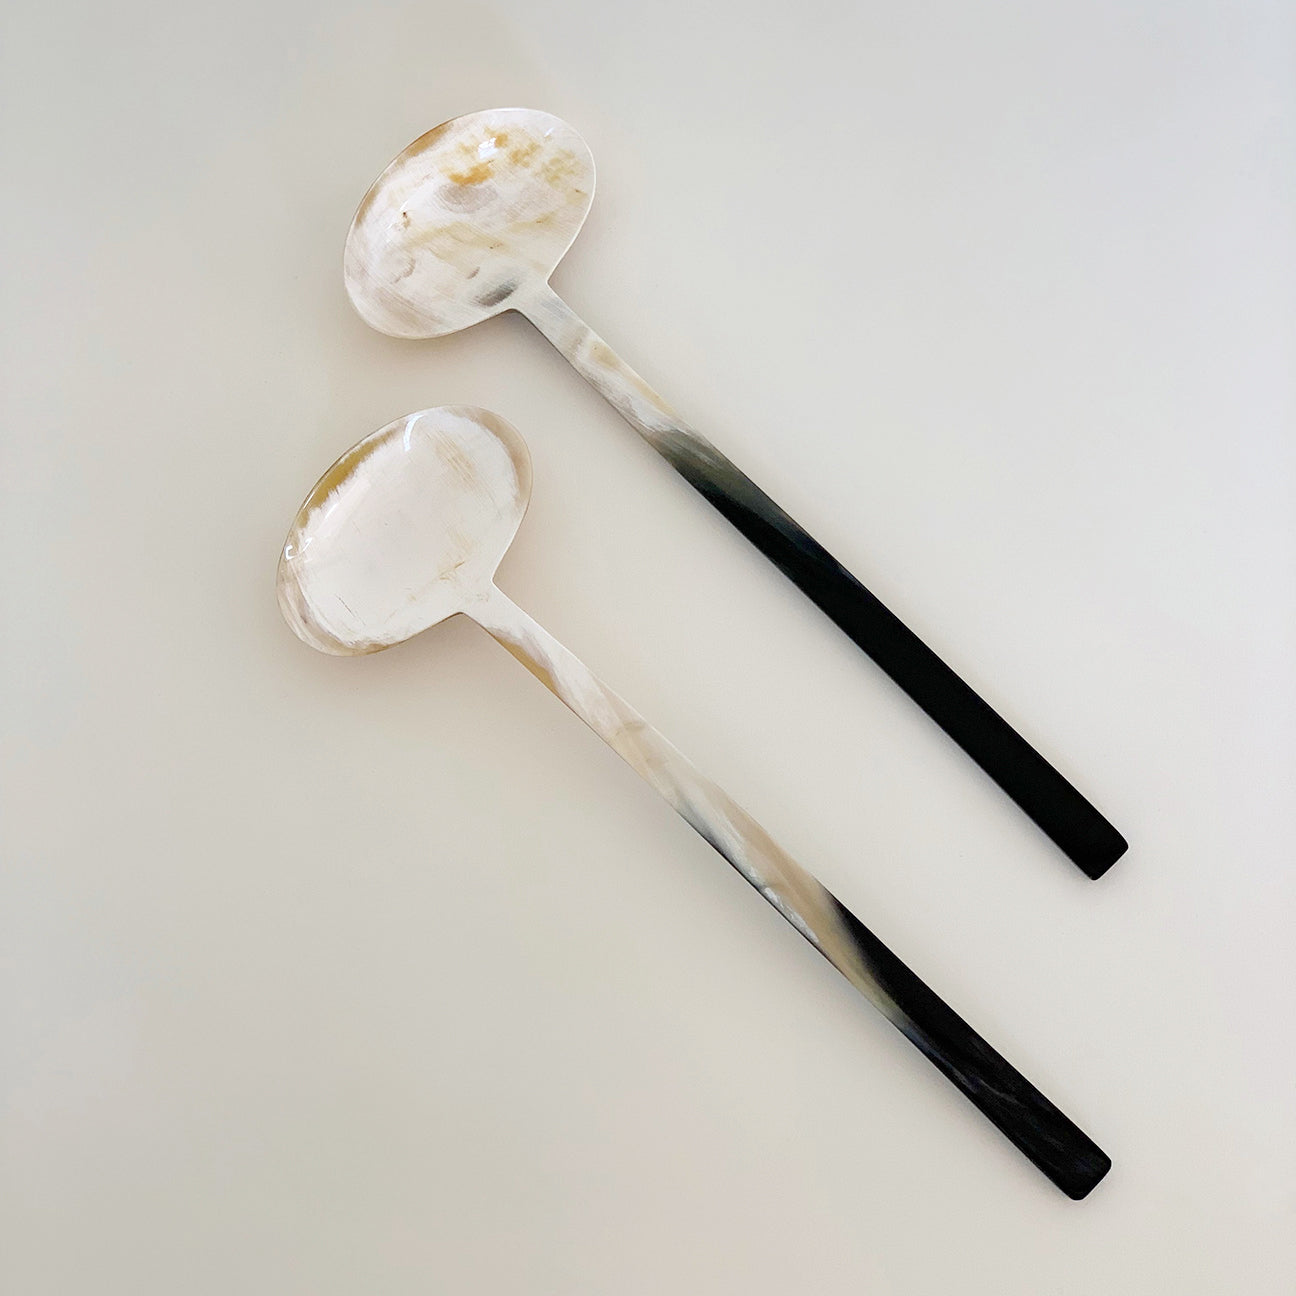 Image of M+A NYC Salad Servers 11" in the color Kora